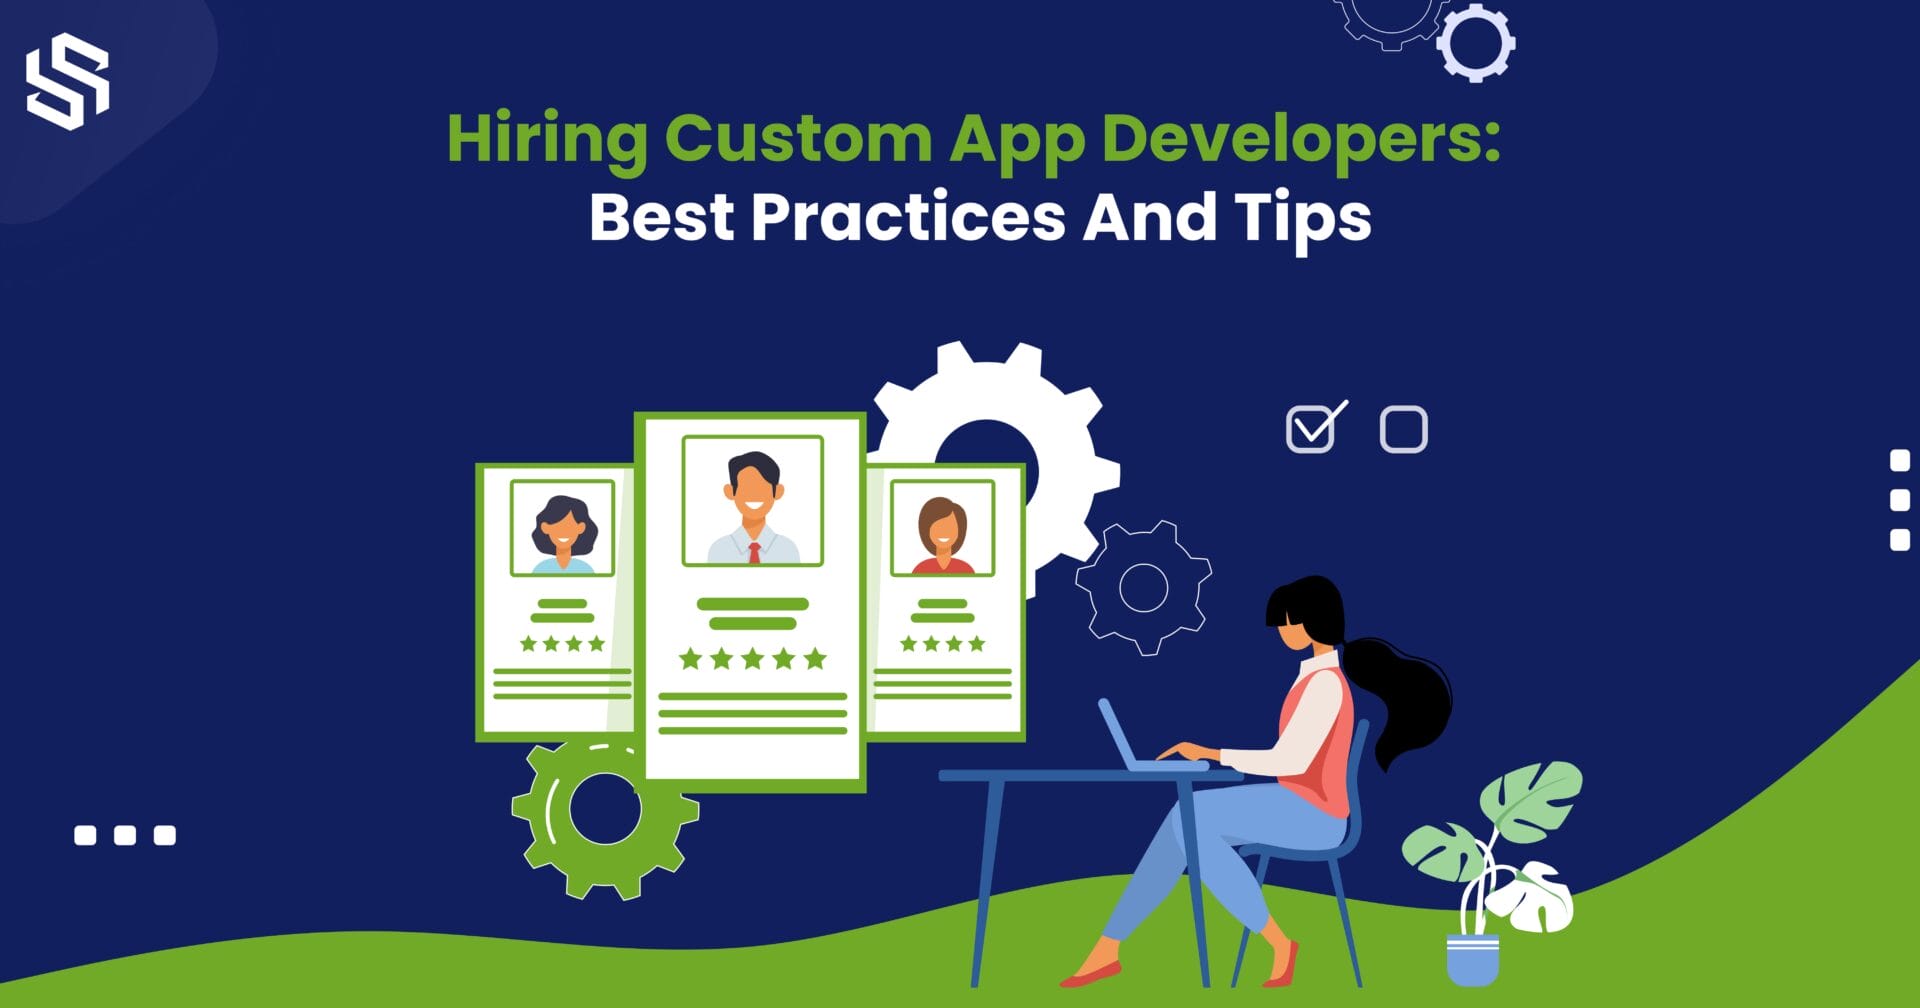 Hiring Custom App Developers - Best Practices and Tips